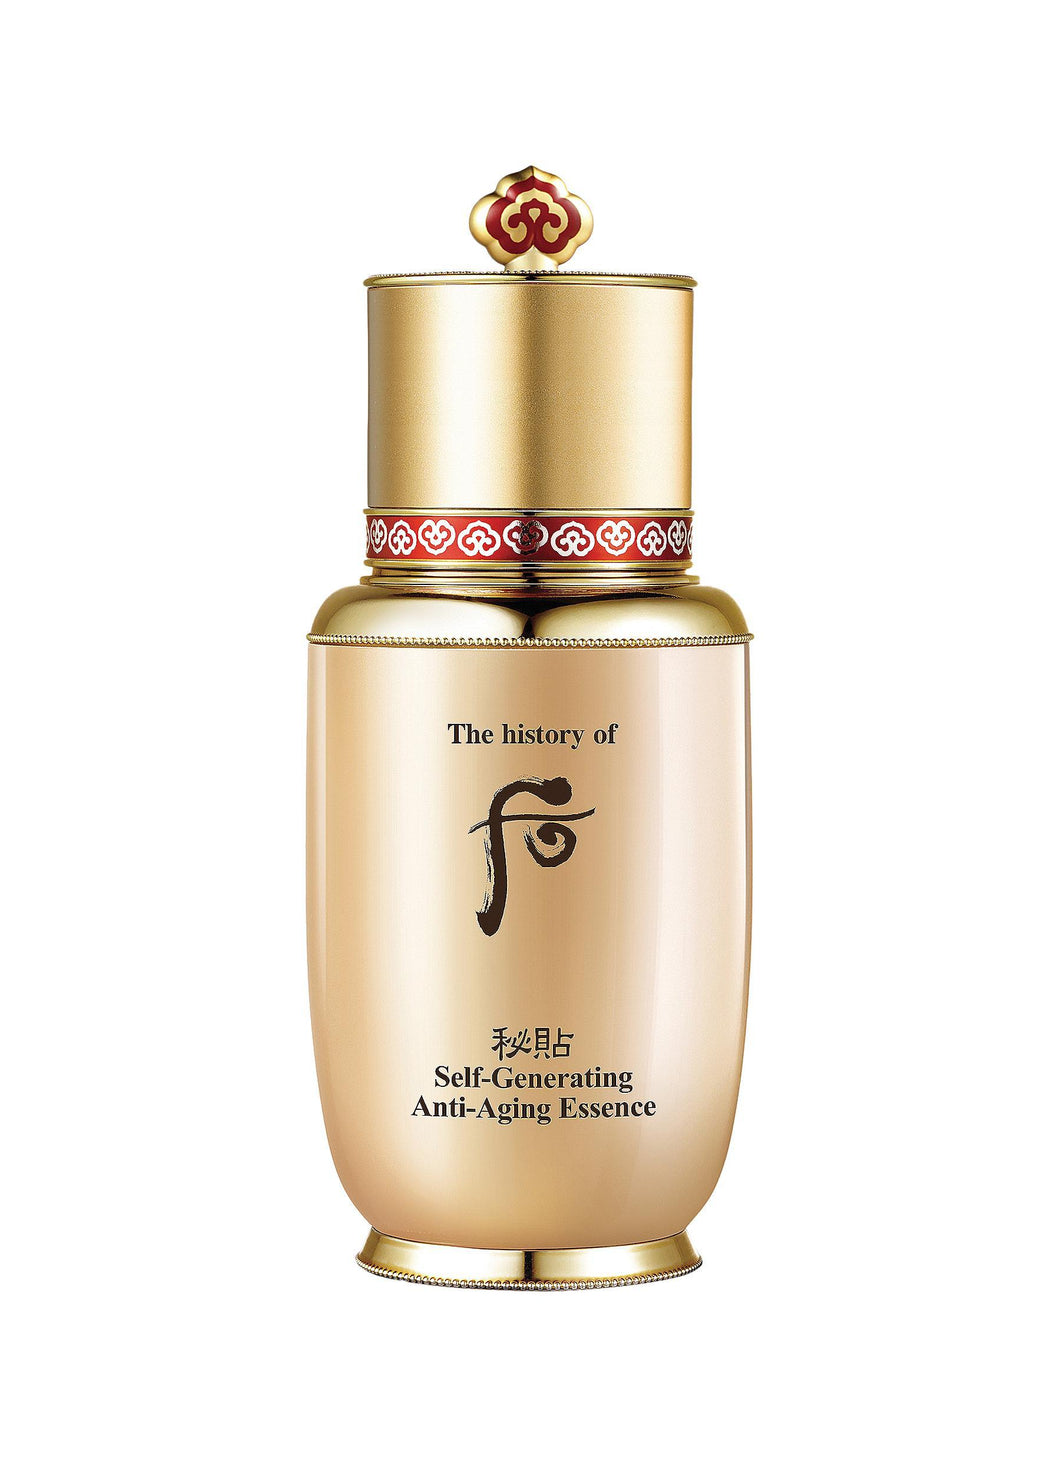 [The History of Whoo] BICHUP Self-Generating Anti-Aging Essence 50ml